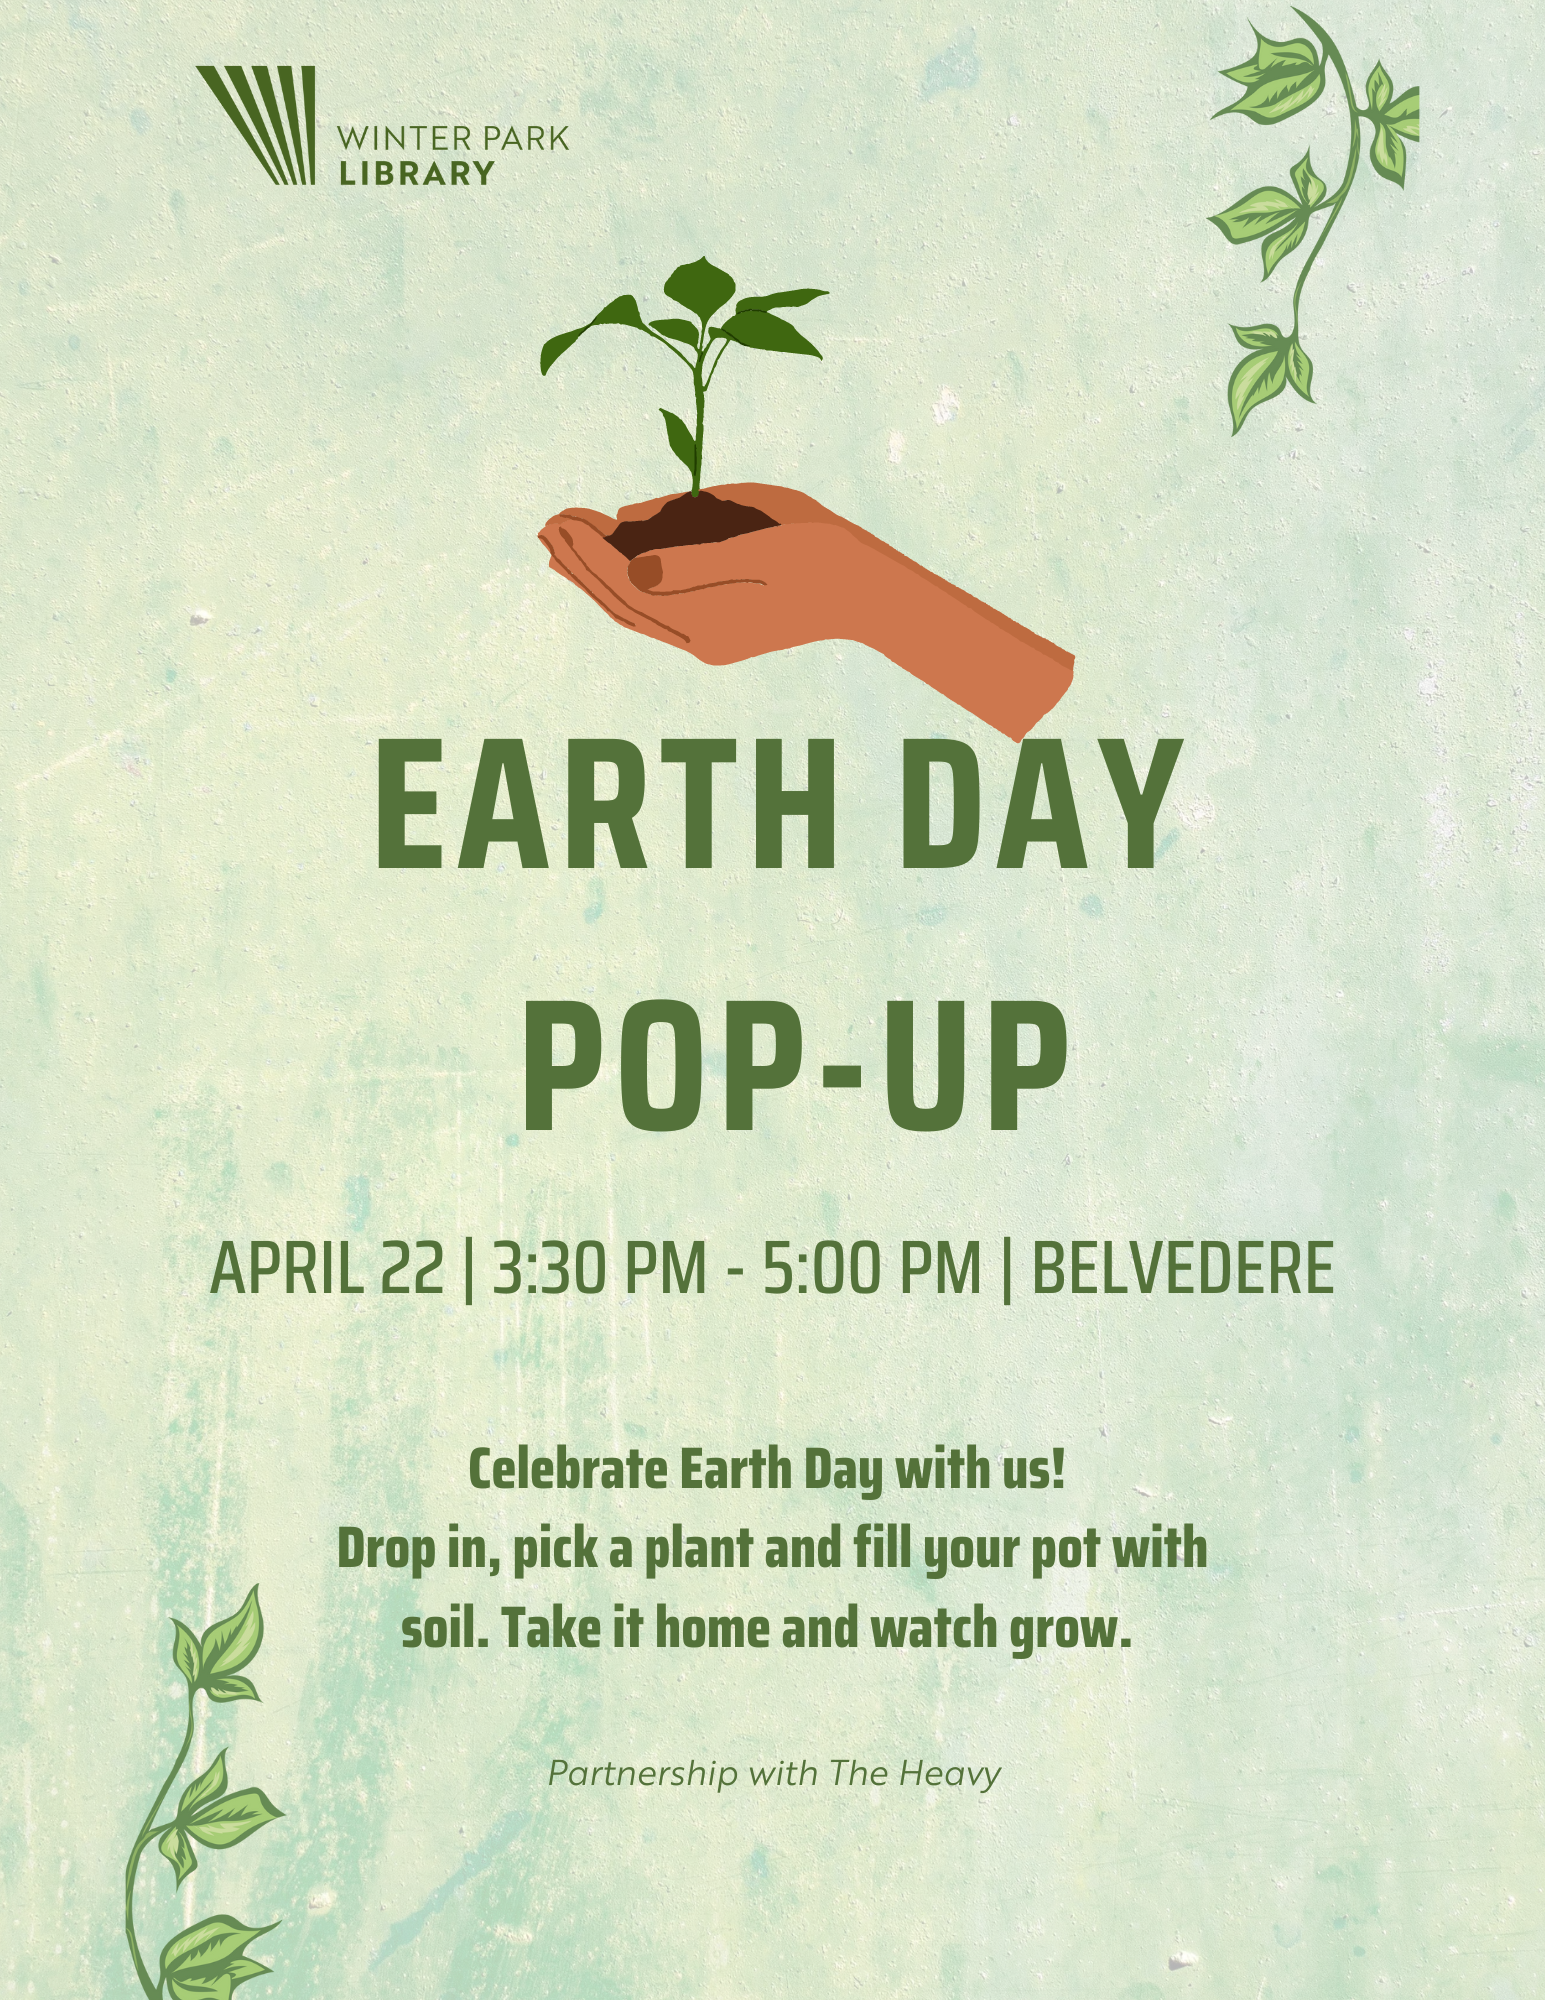 Earth Day Pop-Up hands holding plant